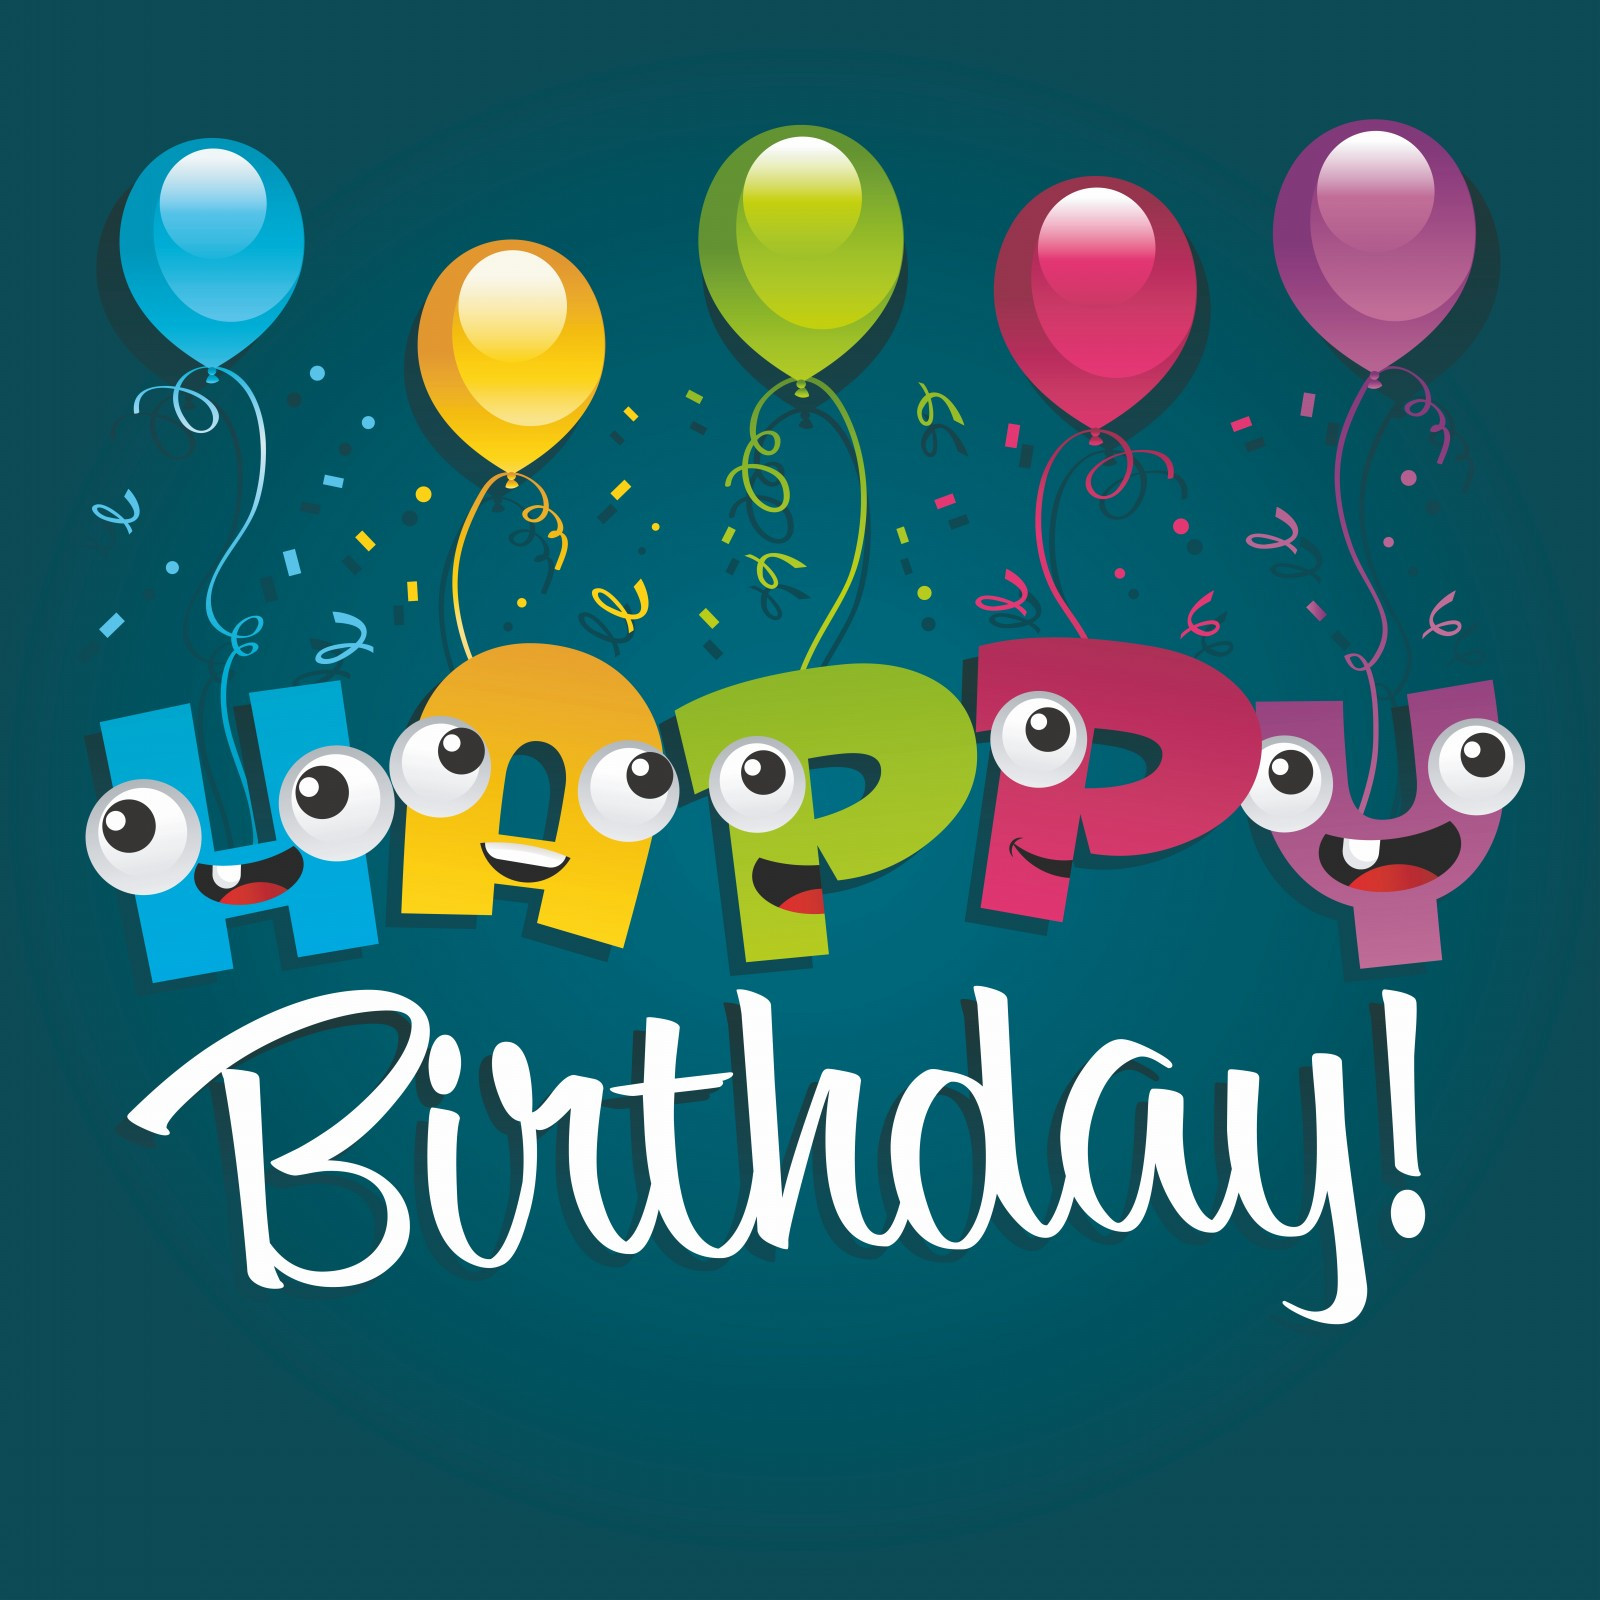 Birthday Card Designs
 35 Happy Birthday Cards Free To Download – The WoW Style